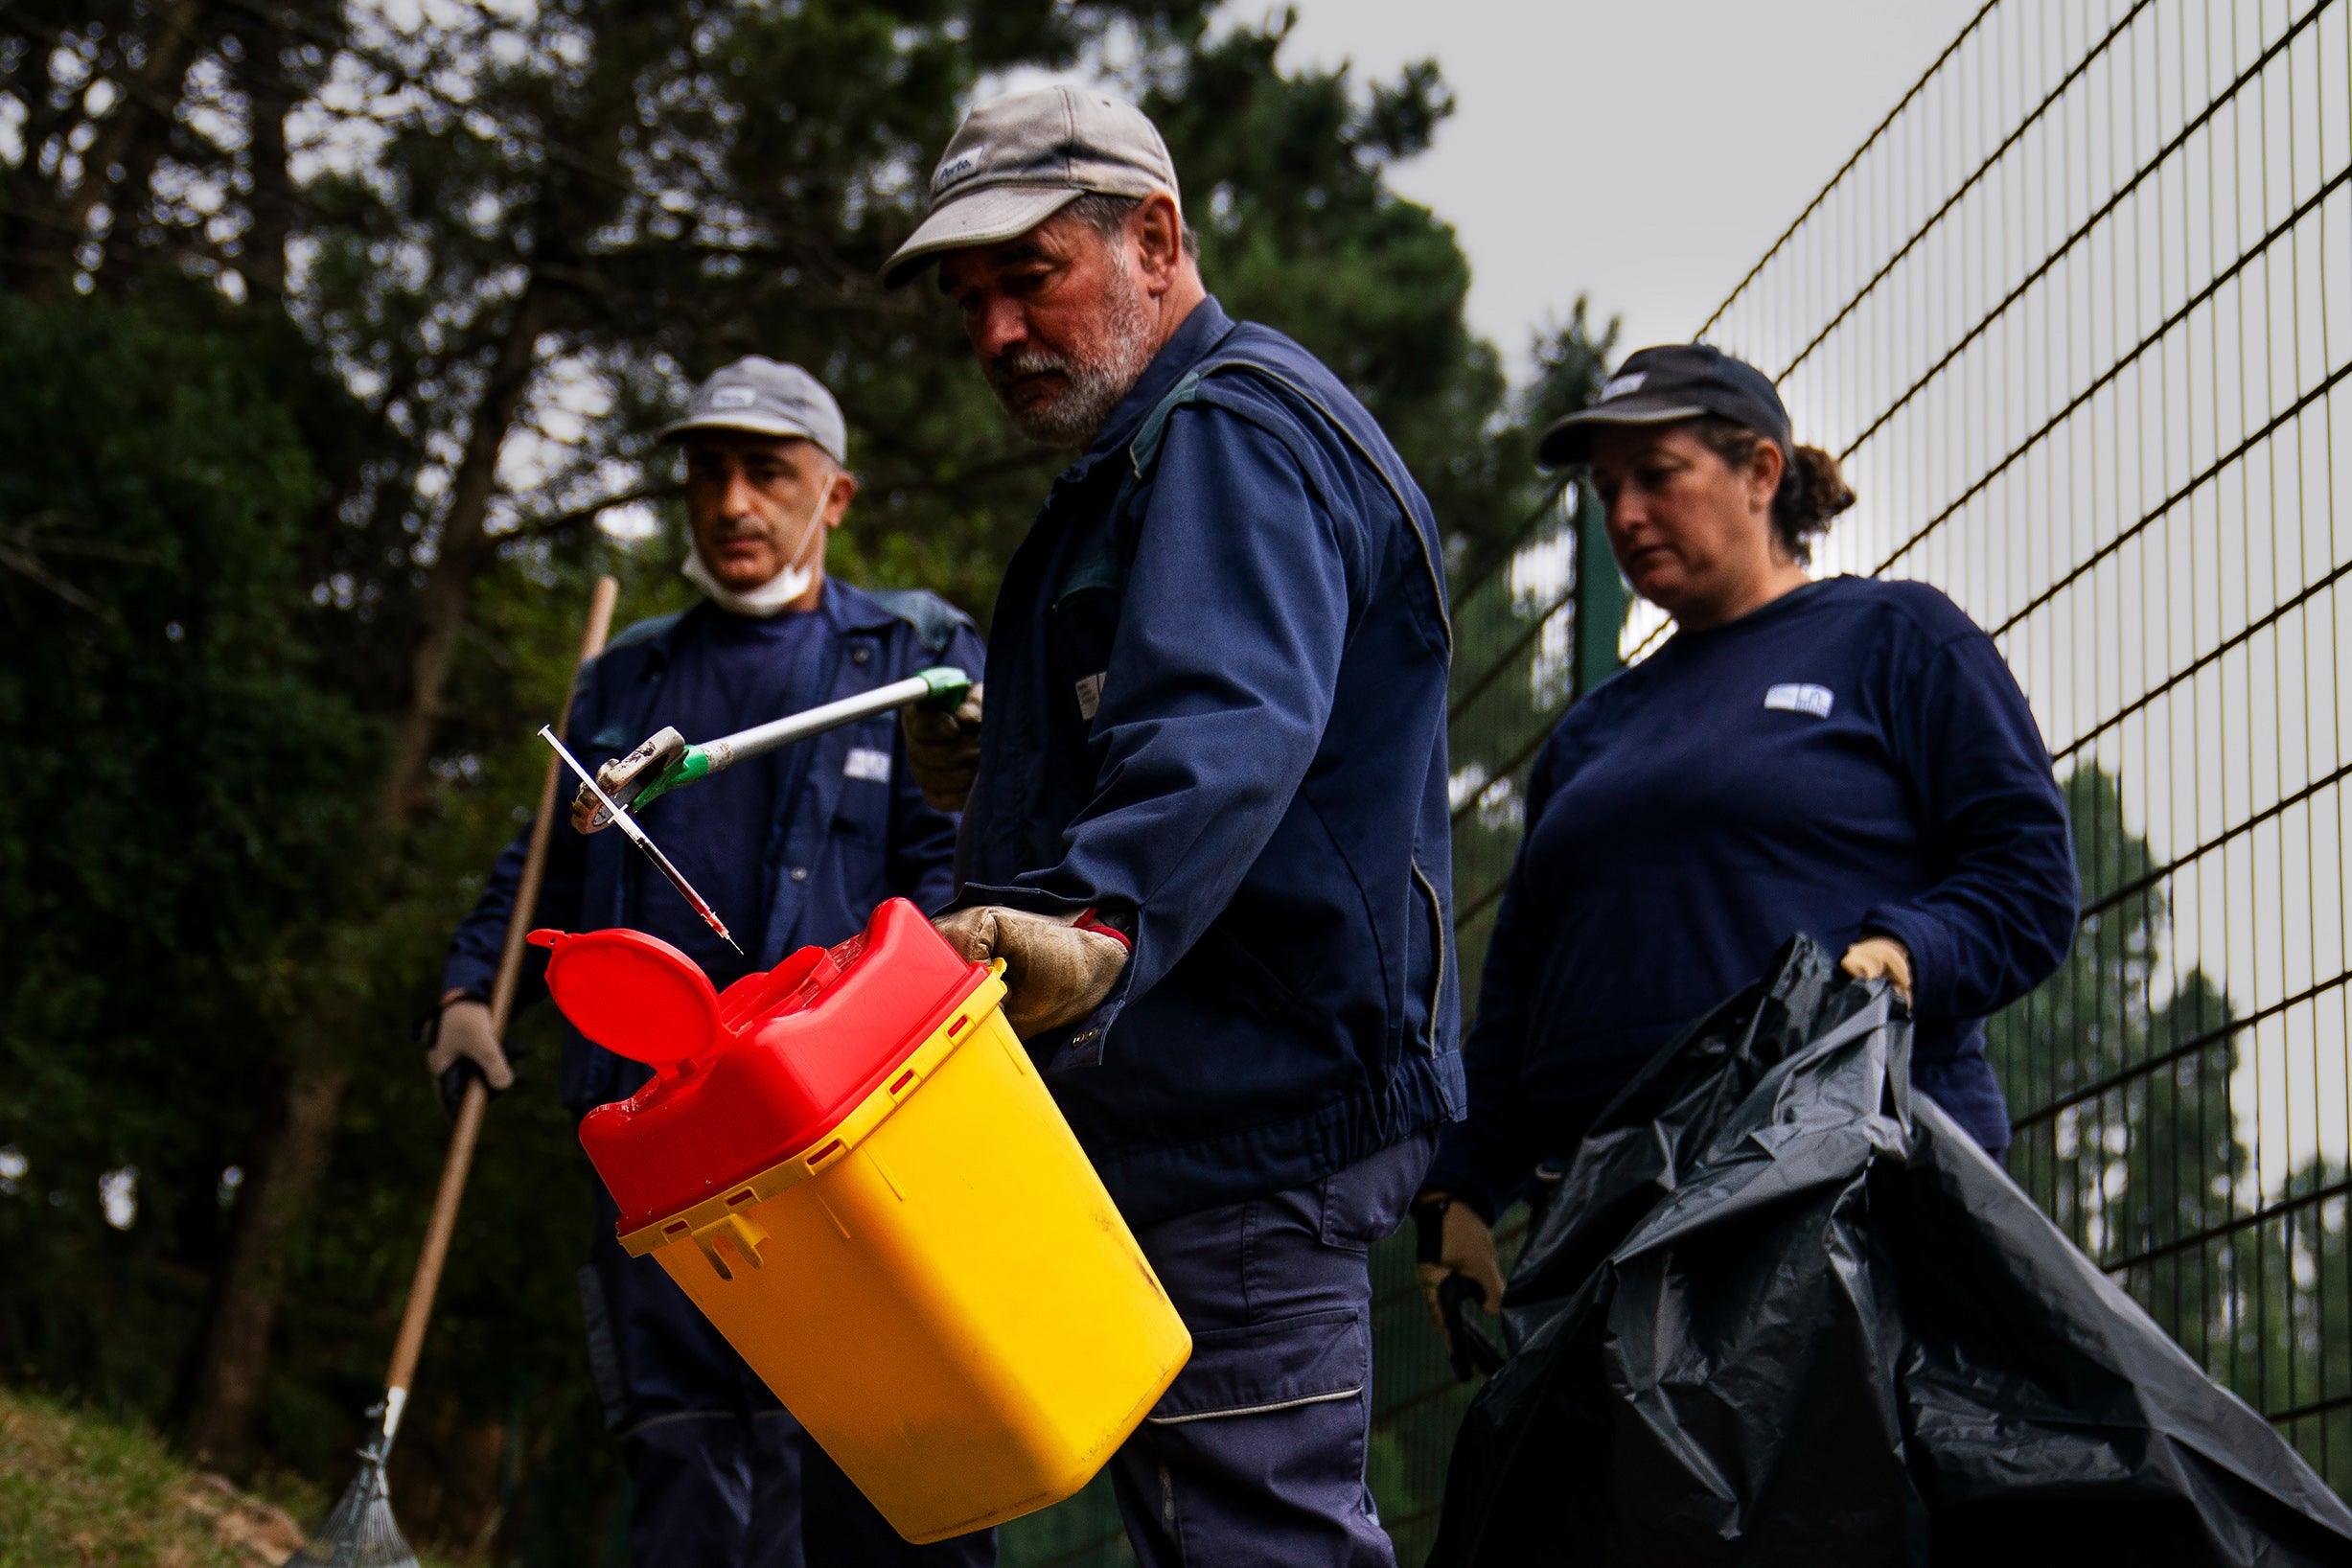 Municipal workers dispose of a used syringe at the Mata da Pasteleira park in Porto